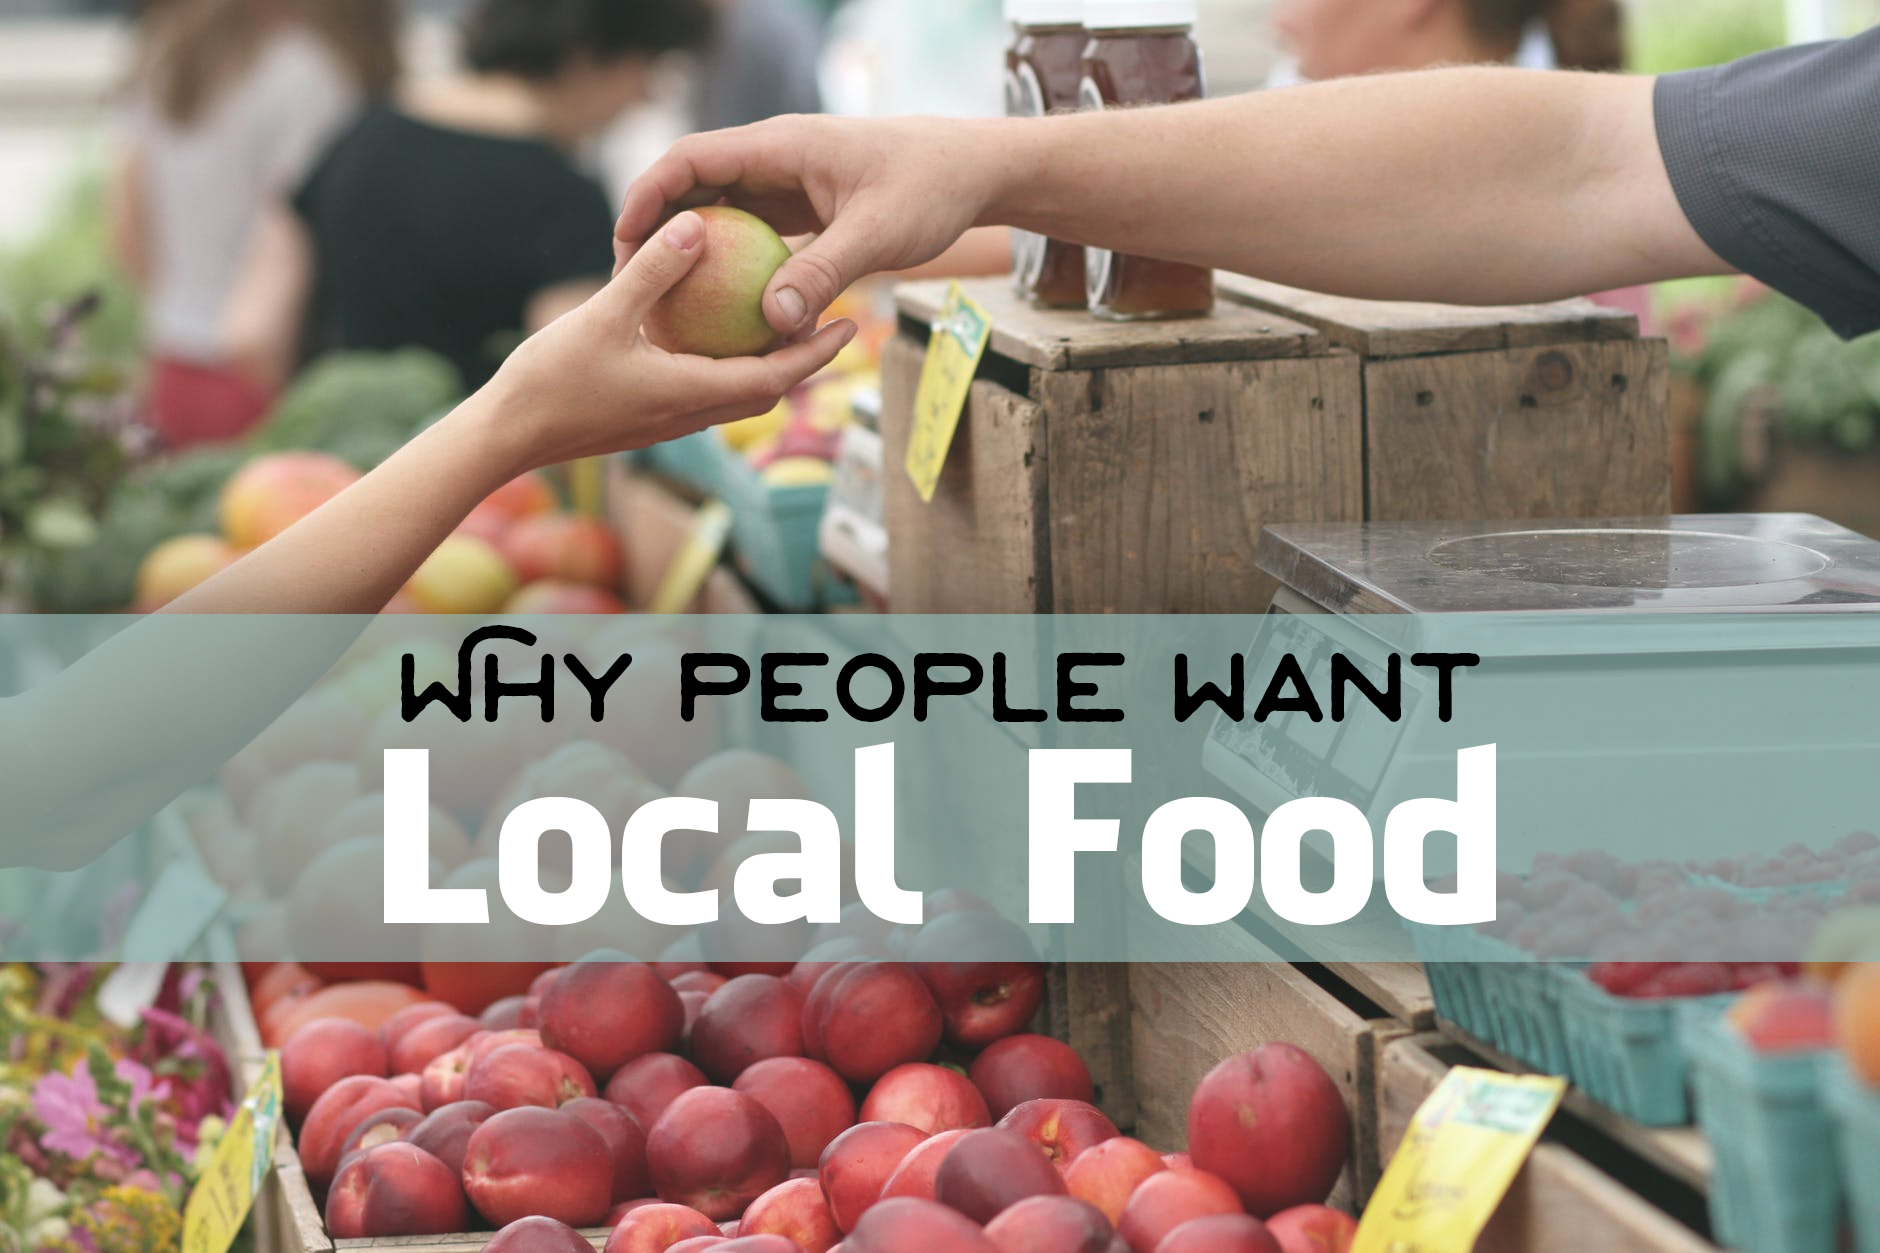 Locally Sourced Food Can Increase Restaurant Sales